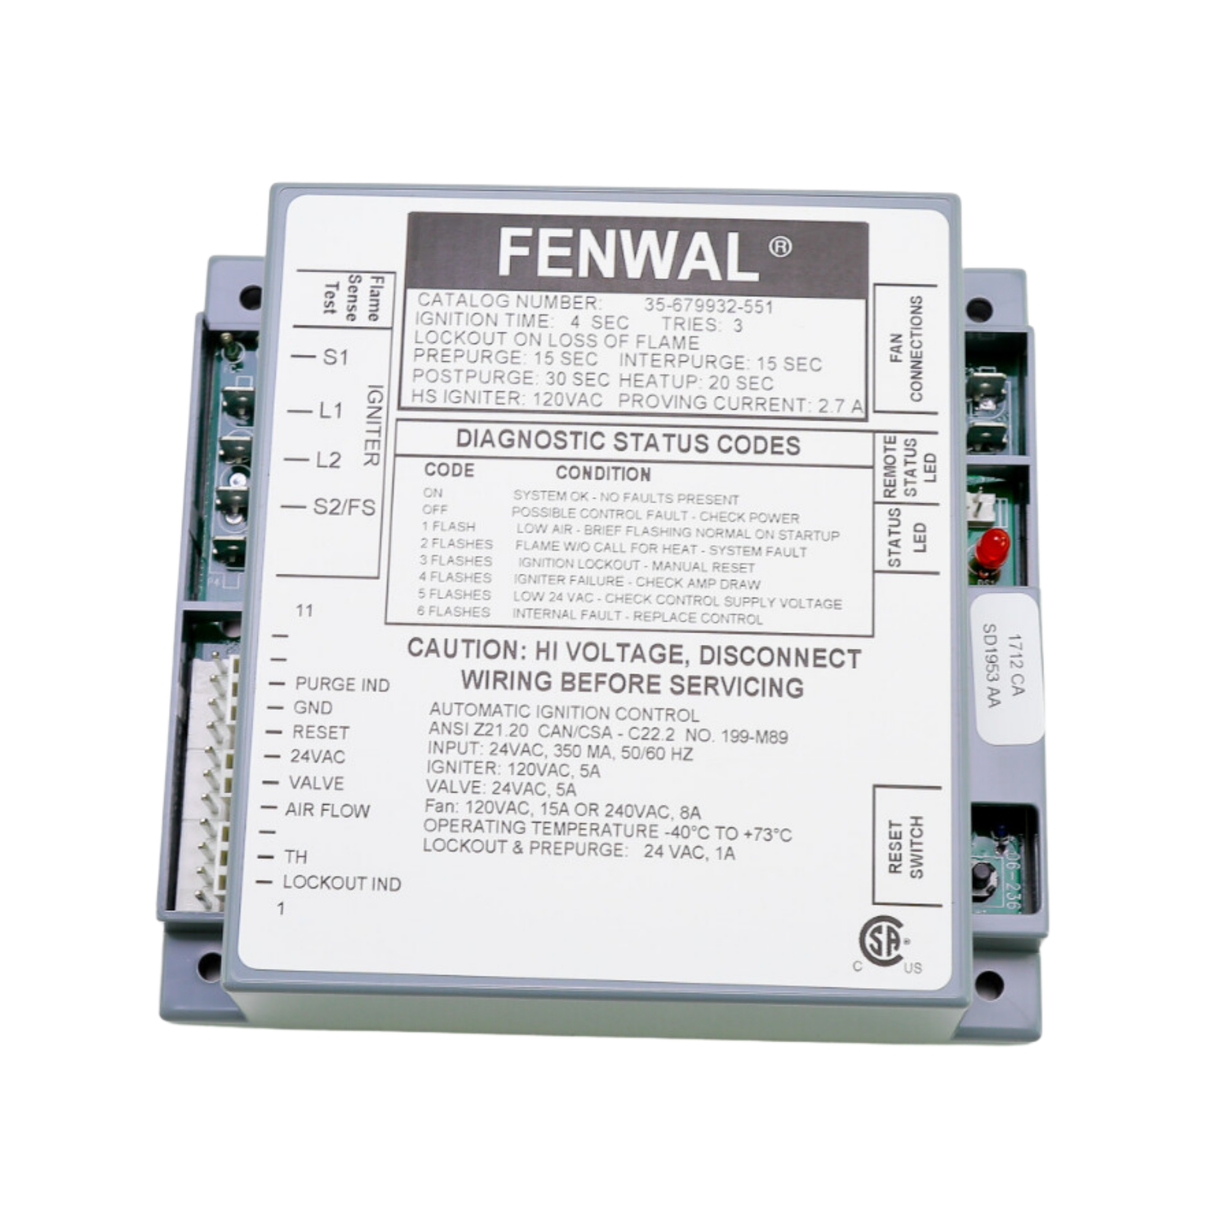 Fenwal 35-679932-551 24VAC, 15s Pre-Purge, 15s Inter-Purge, 0 Ignition Time, 20s Heat Up, Ignition Control